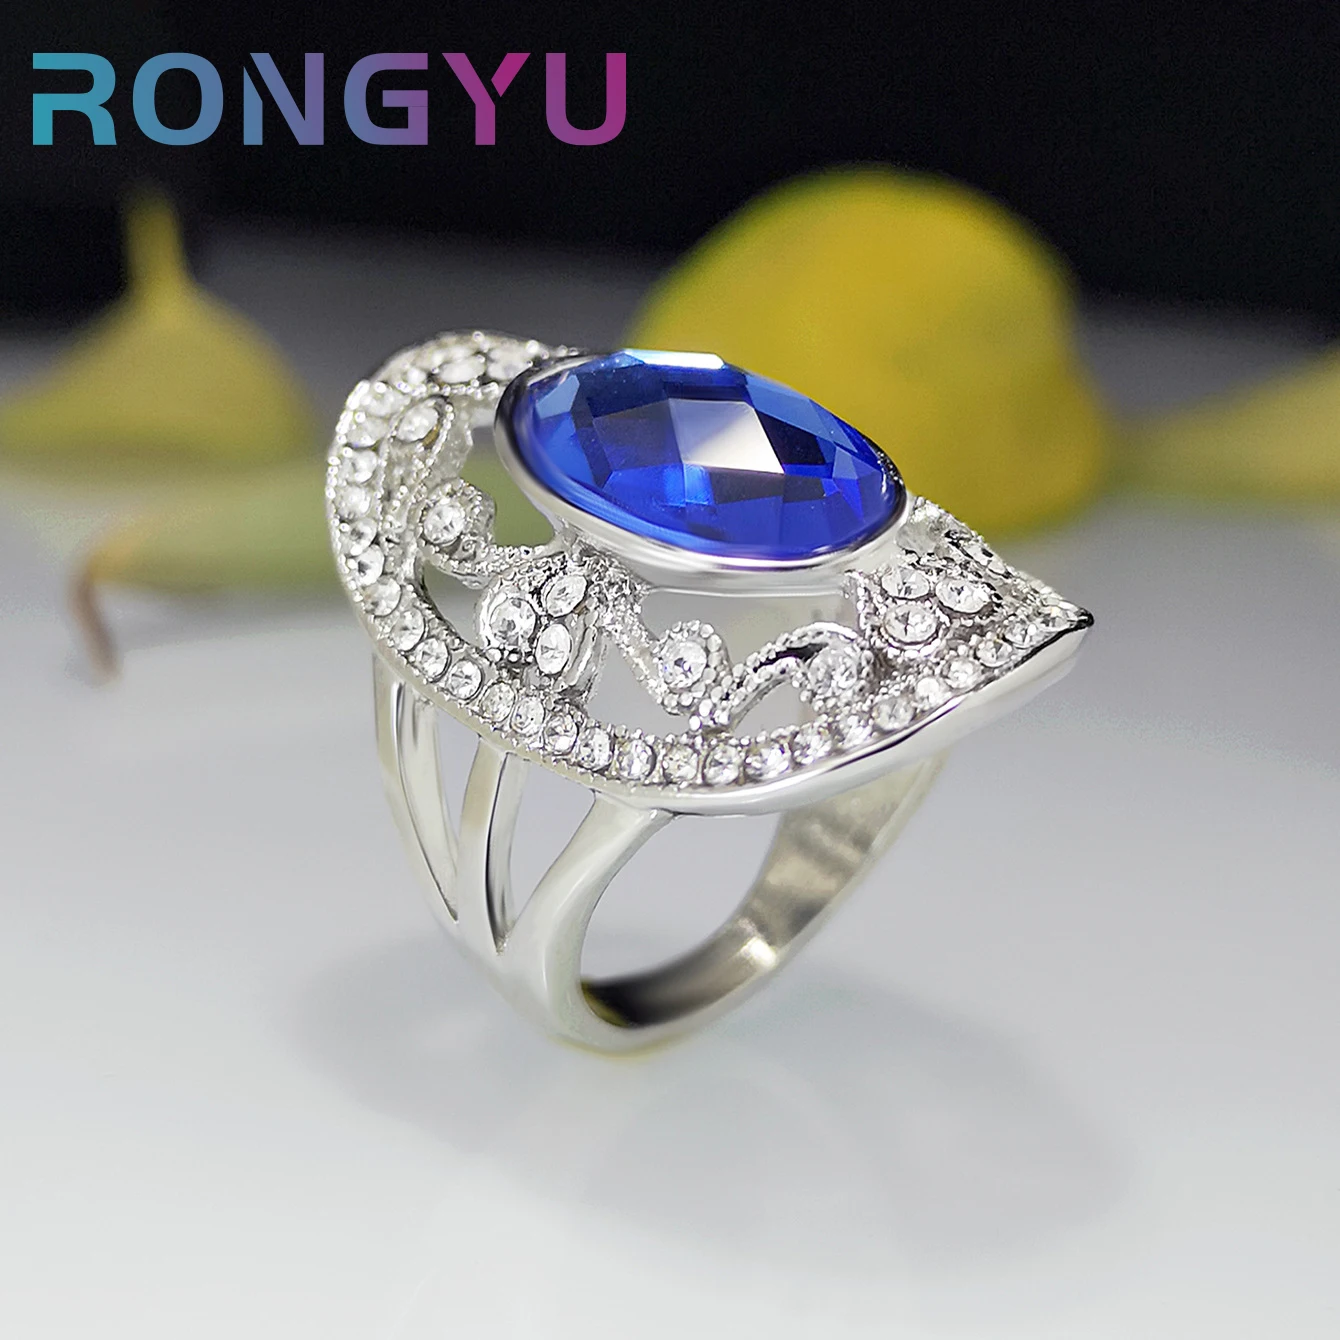 

Couple Female Fashion Wedding Rings Women's Vintage Luxury Blue Crystal Massive Ring Unusual Aesthetic Jewelry Gifts Accessories